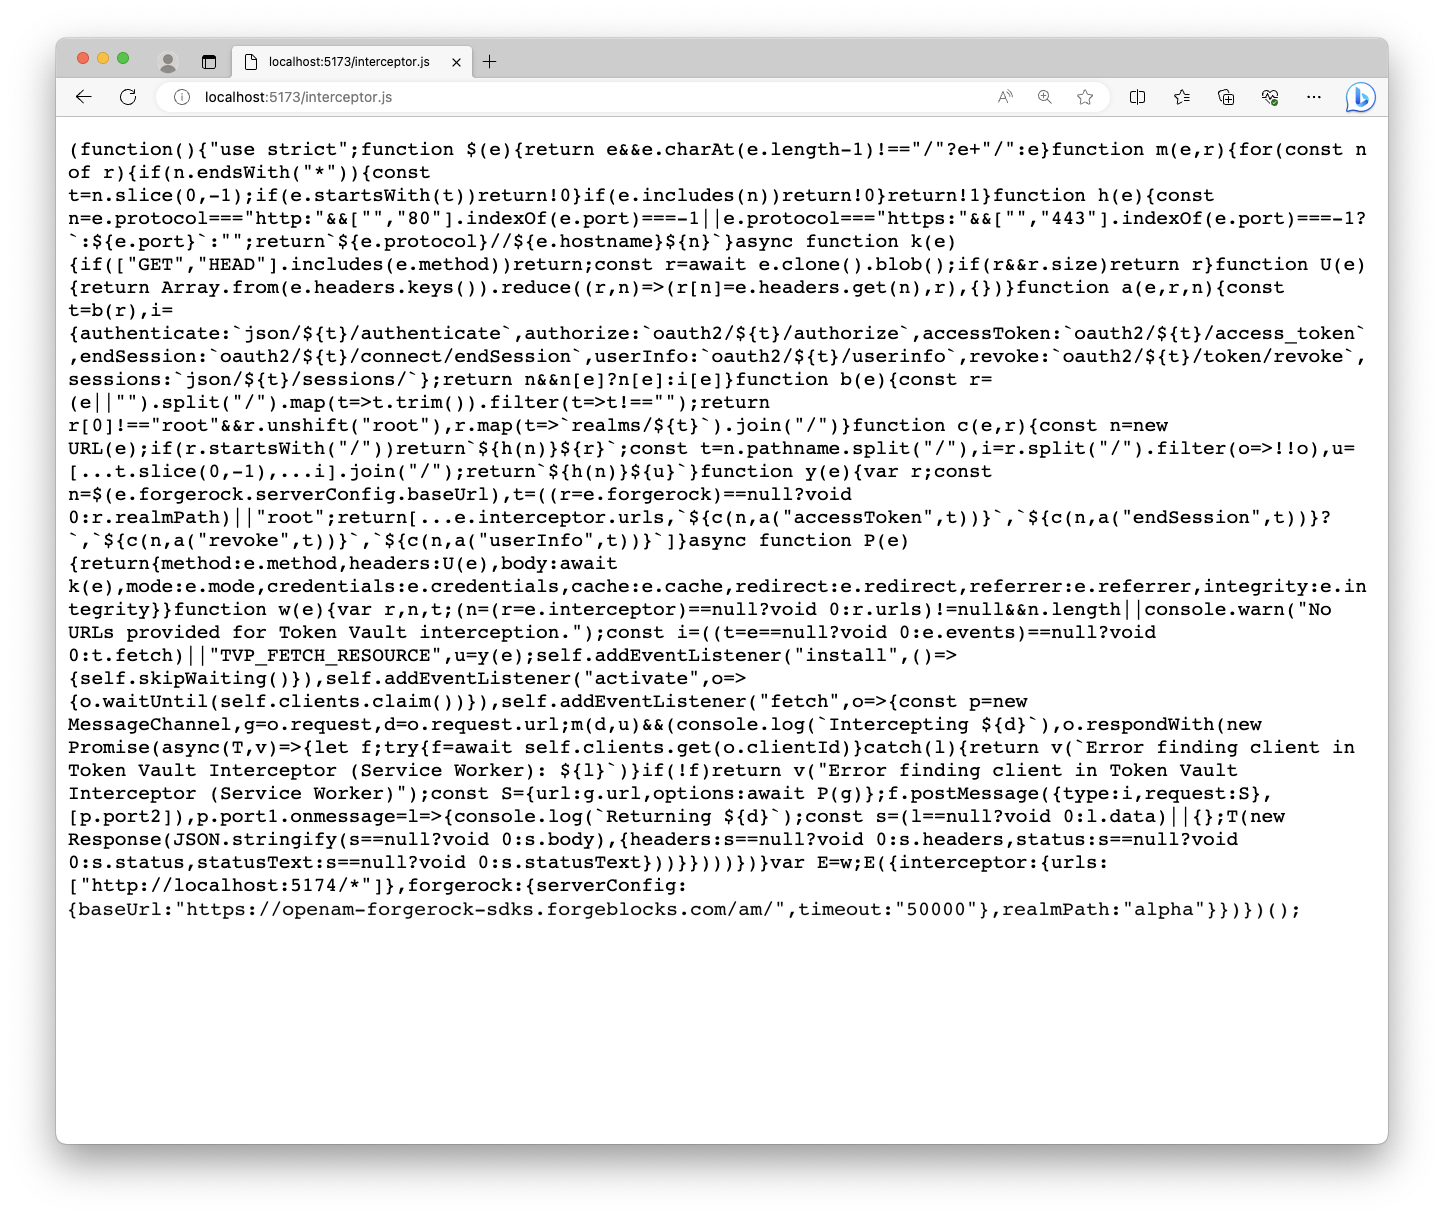 Viewing raw JavaScript from Interceptor file in a browser